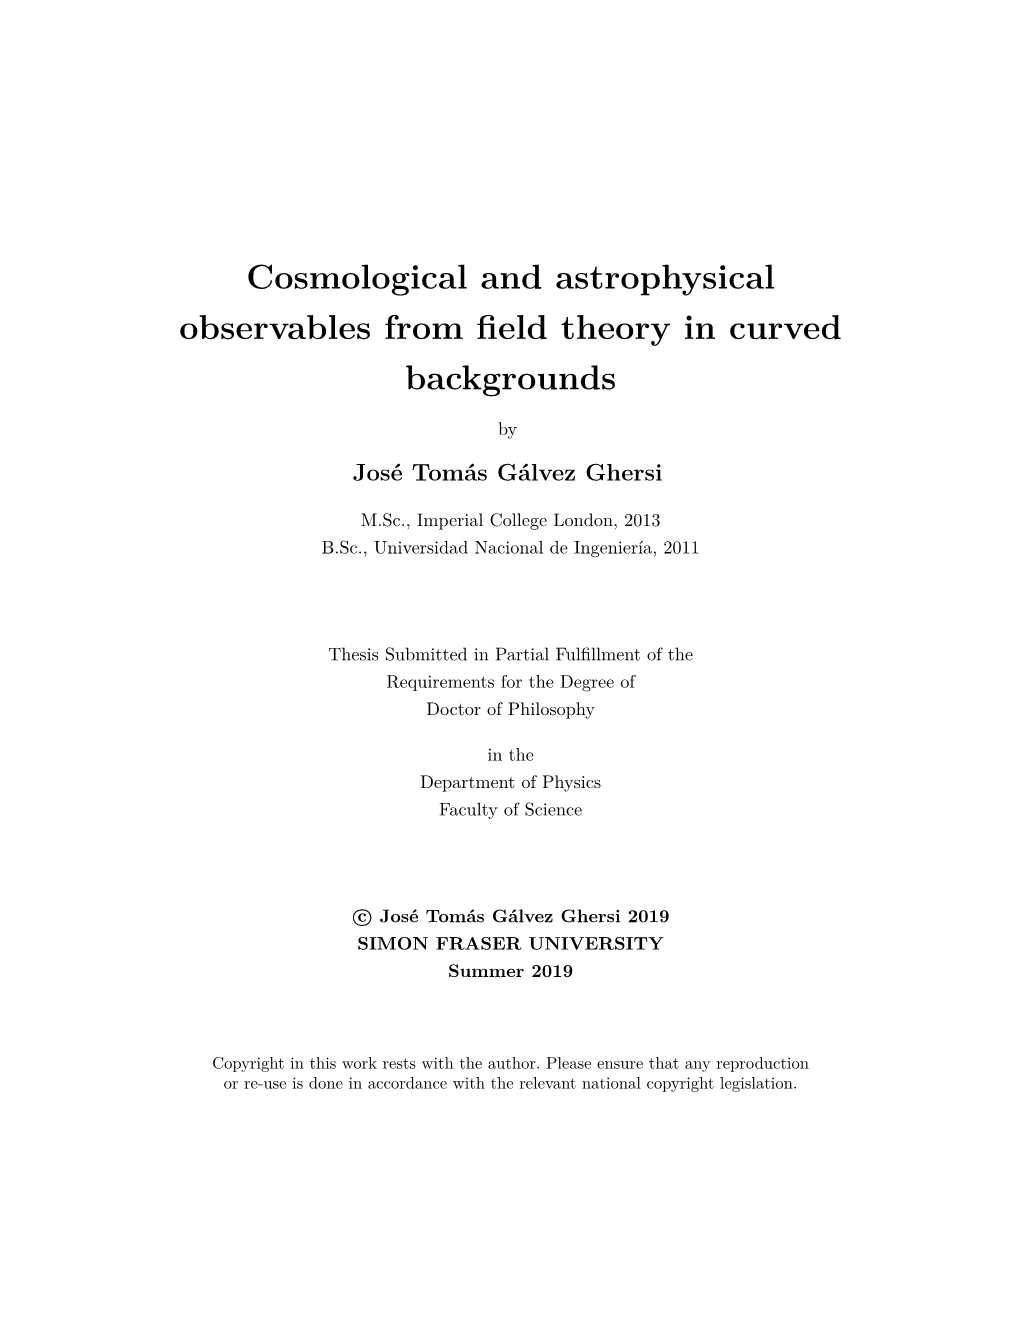 Cosmological and Astrophysical Observables from Field Theory in Curved Backgrounds